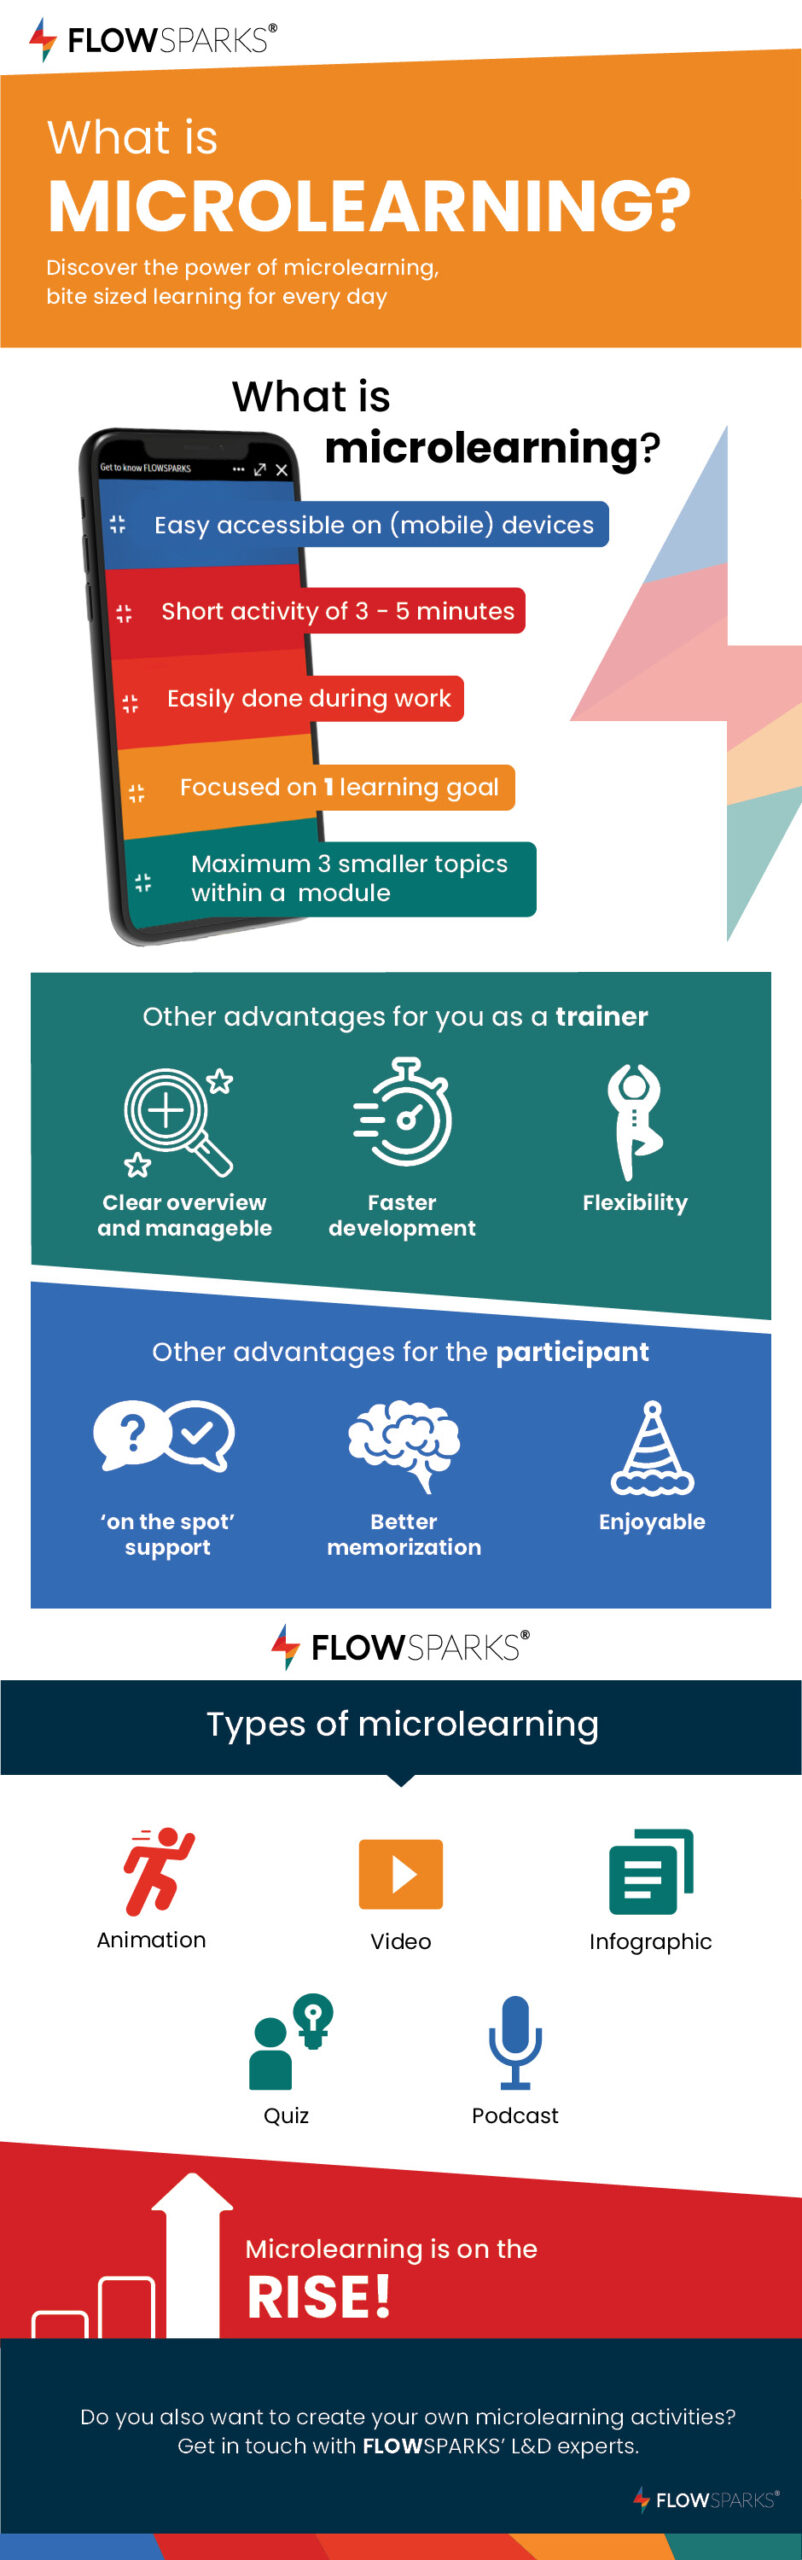 microlearning-infographic